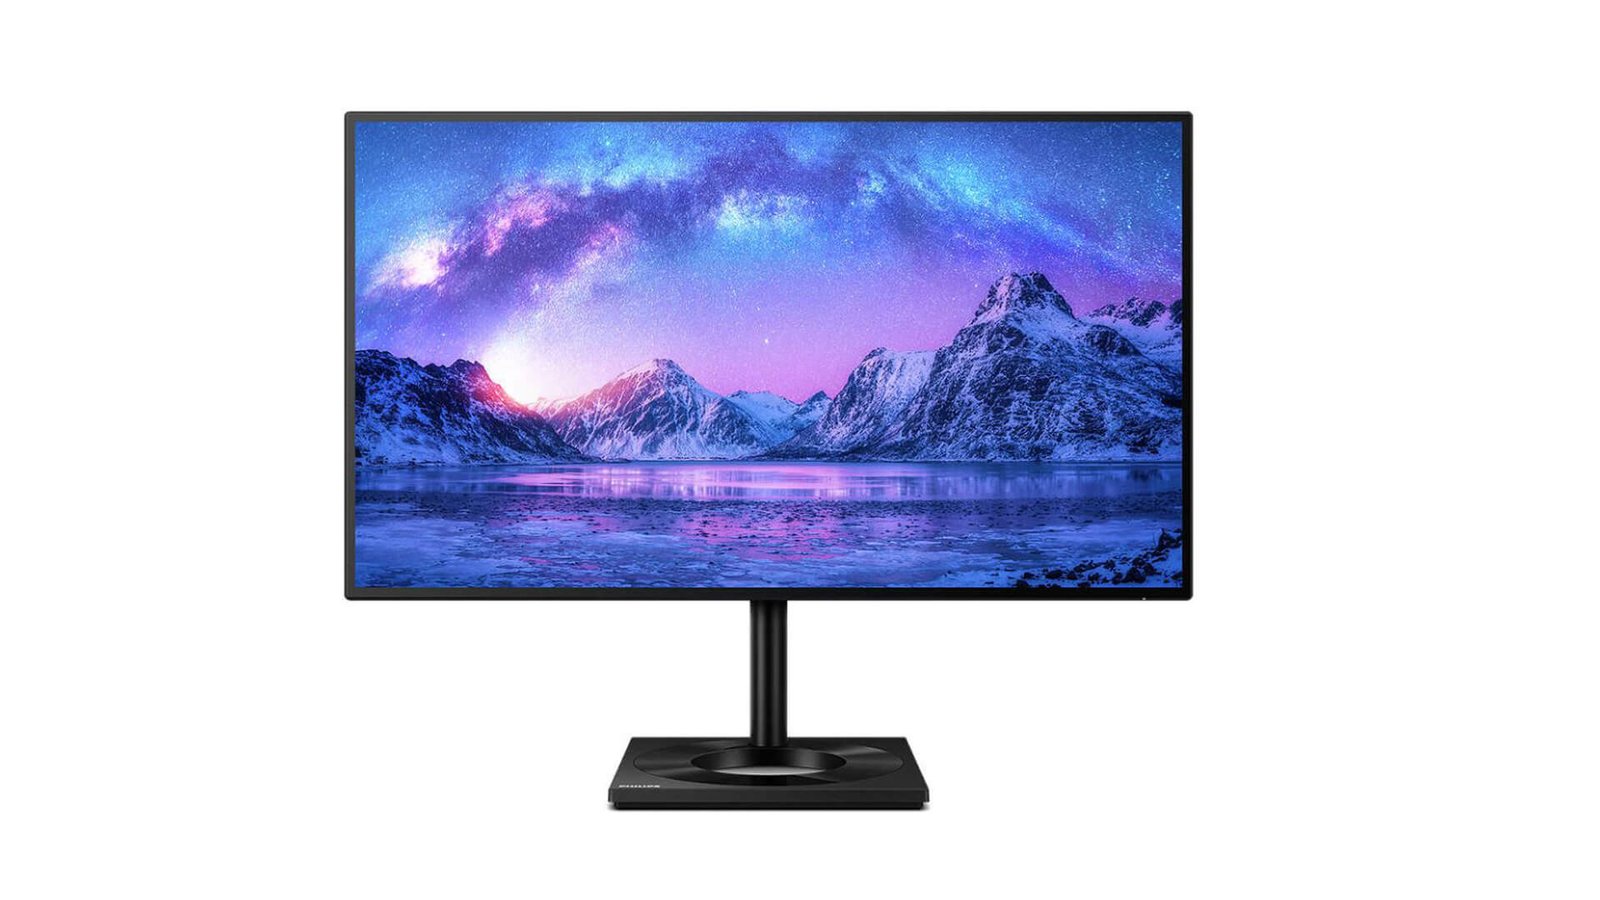 emergency Familiar beggar Philips launches a new 27-inch 4K monitor with 75Hz refresh rate